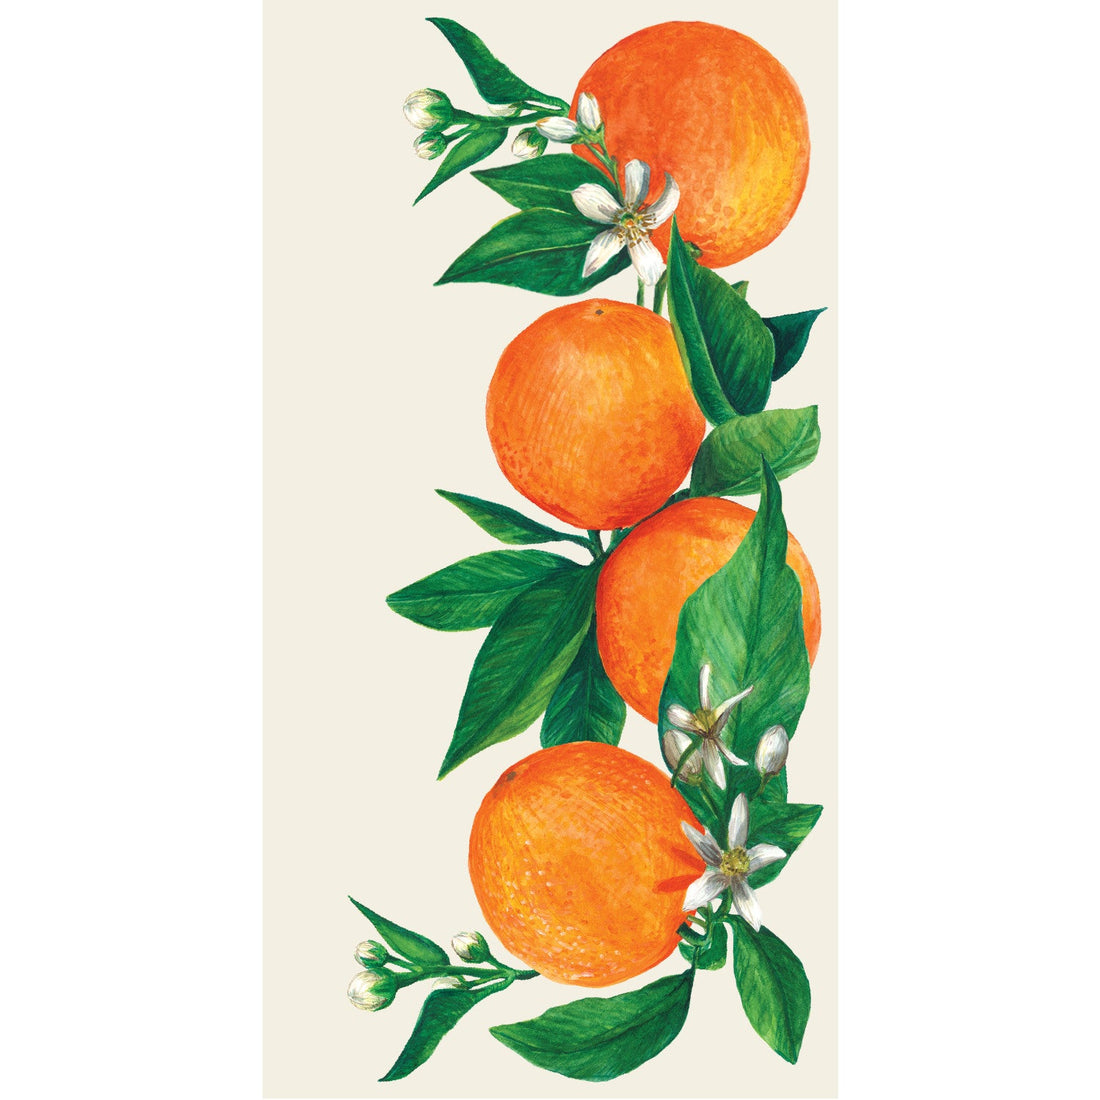 A watercolor illustration of oranges and leaves on a white background featuring SEO keywords: Hester &amp; Cook Orange Orchard Napkins.